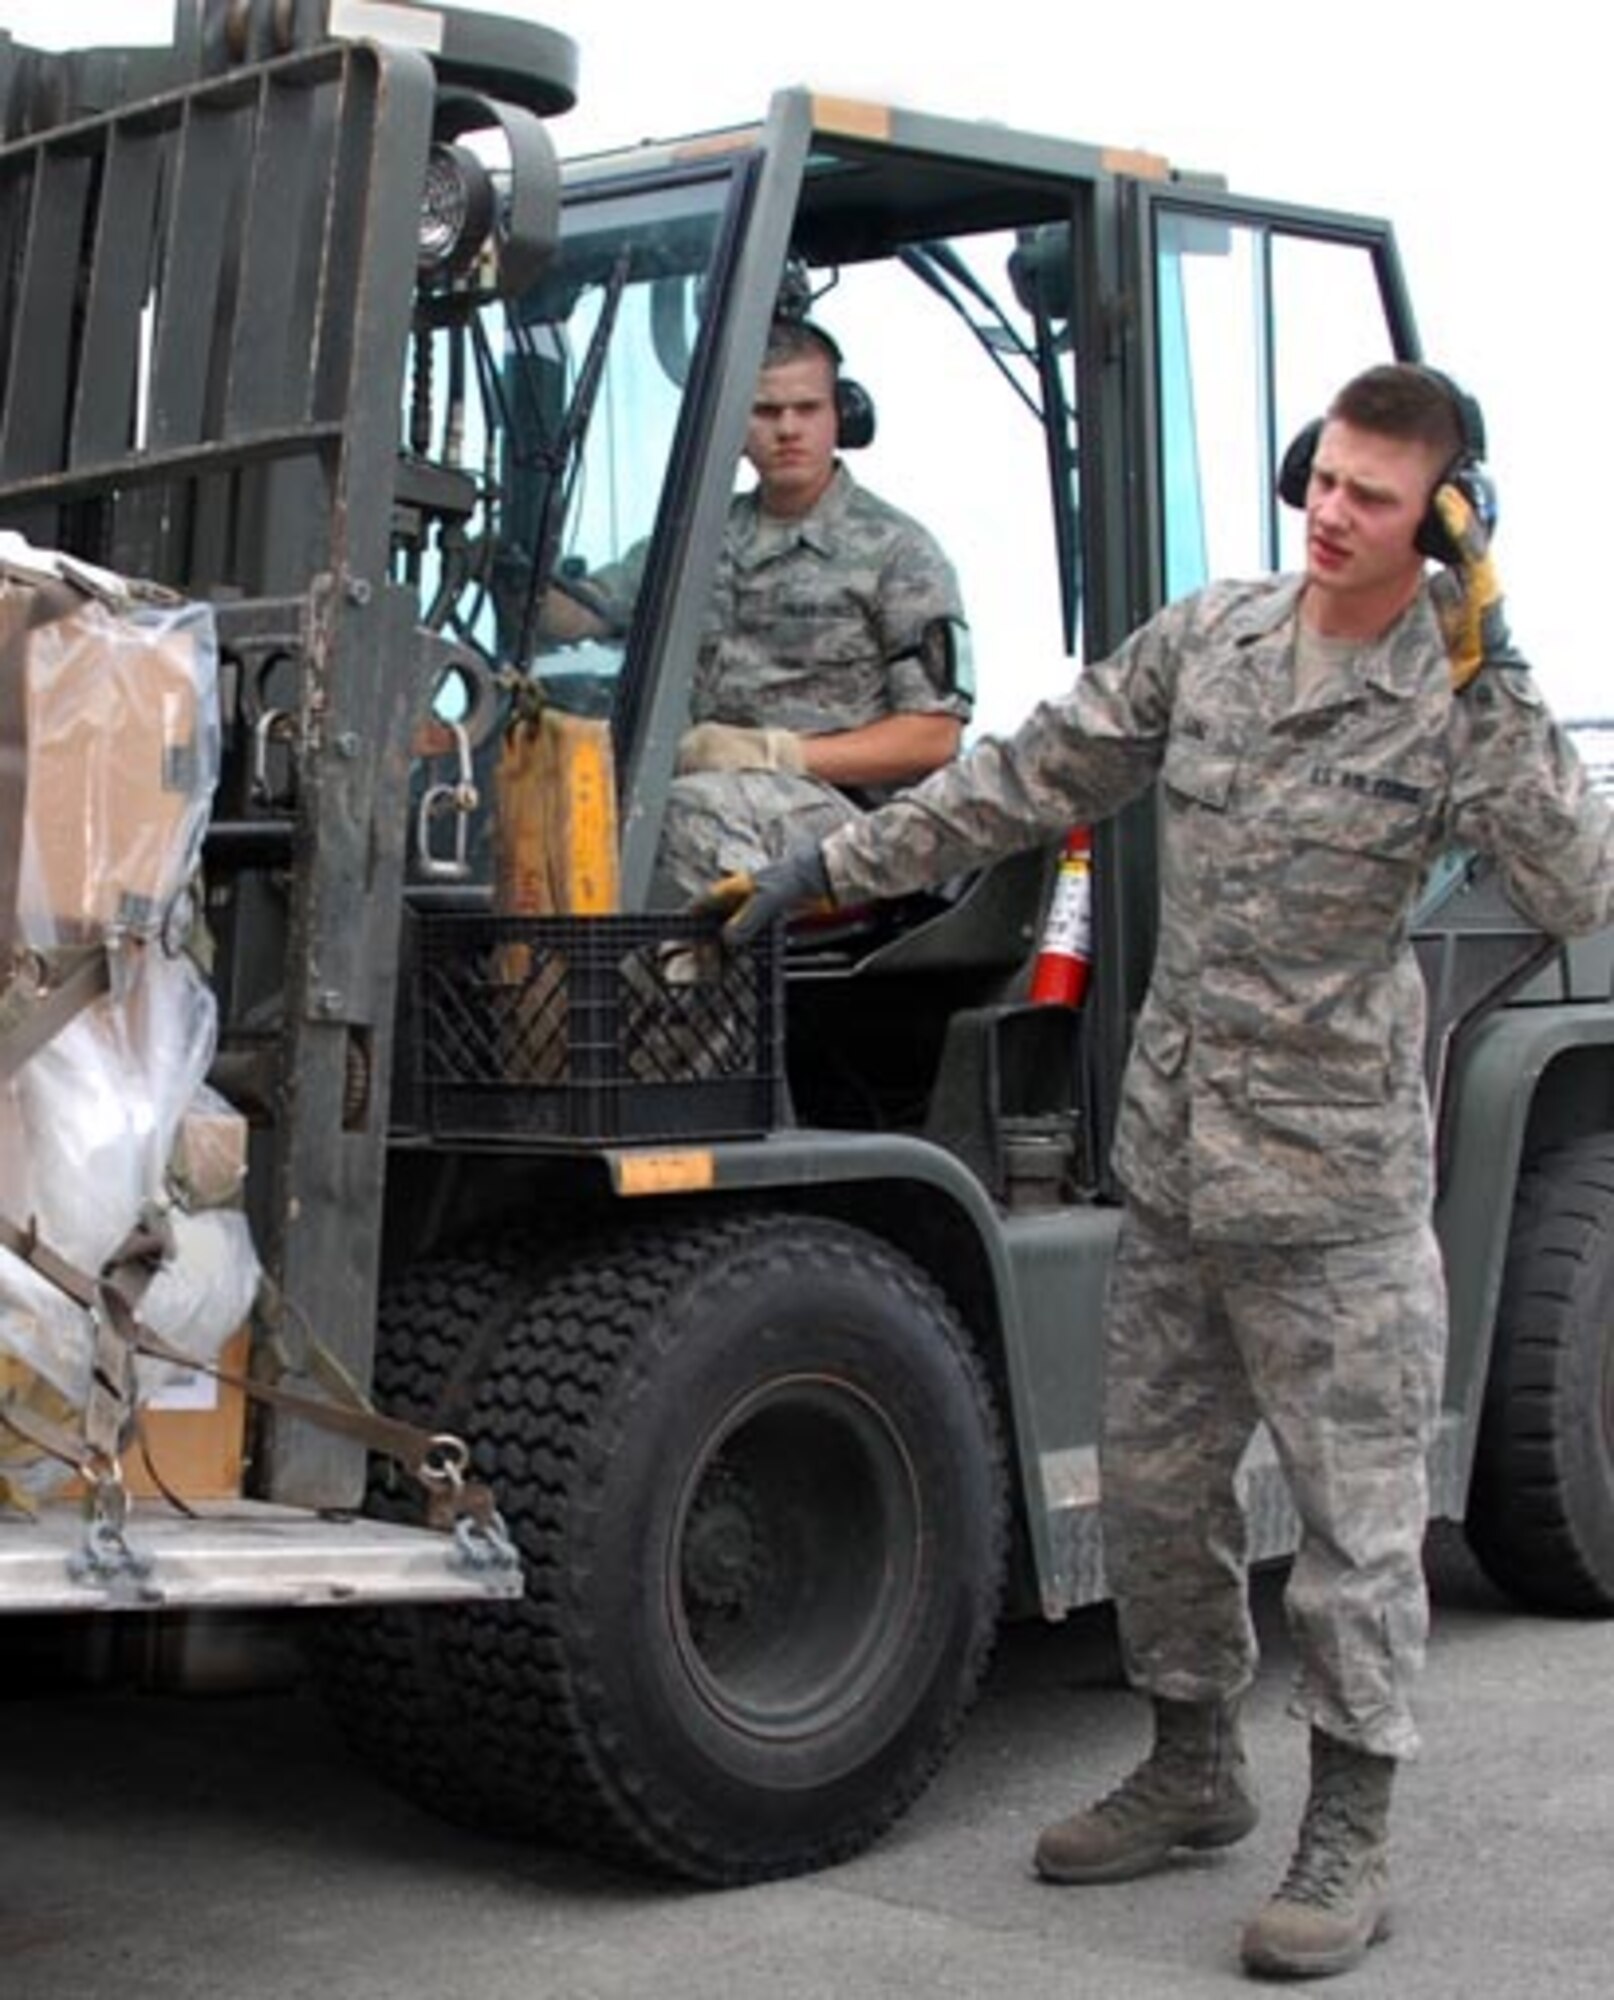 SrA David Williams drives the forklift while A1C Joseph Lenz guides him during the cargo build-up portion of the 176 LRS/ Aerial Port rodeo held Jun 12.